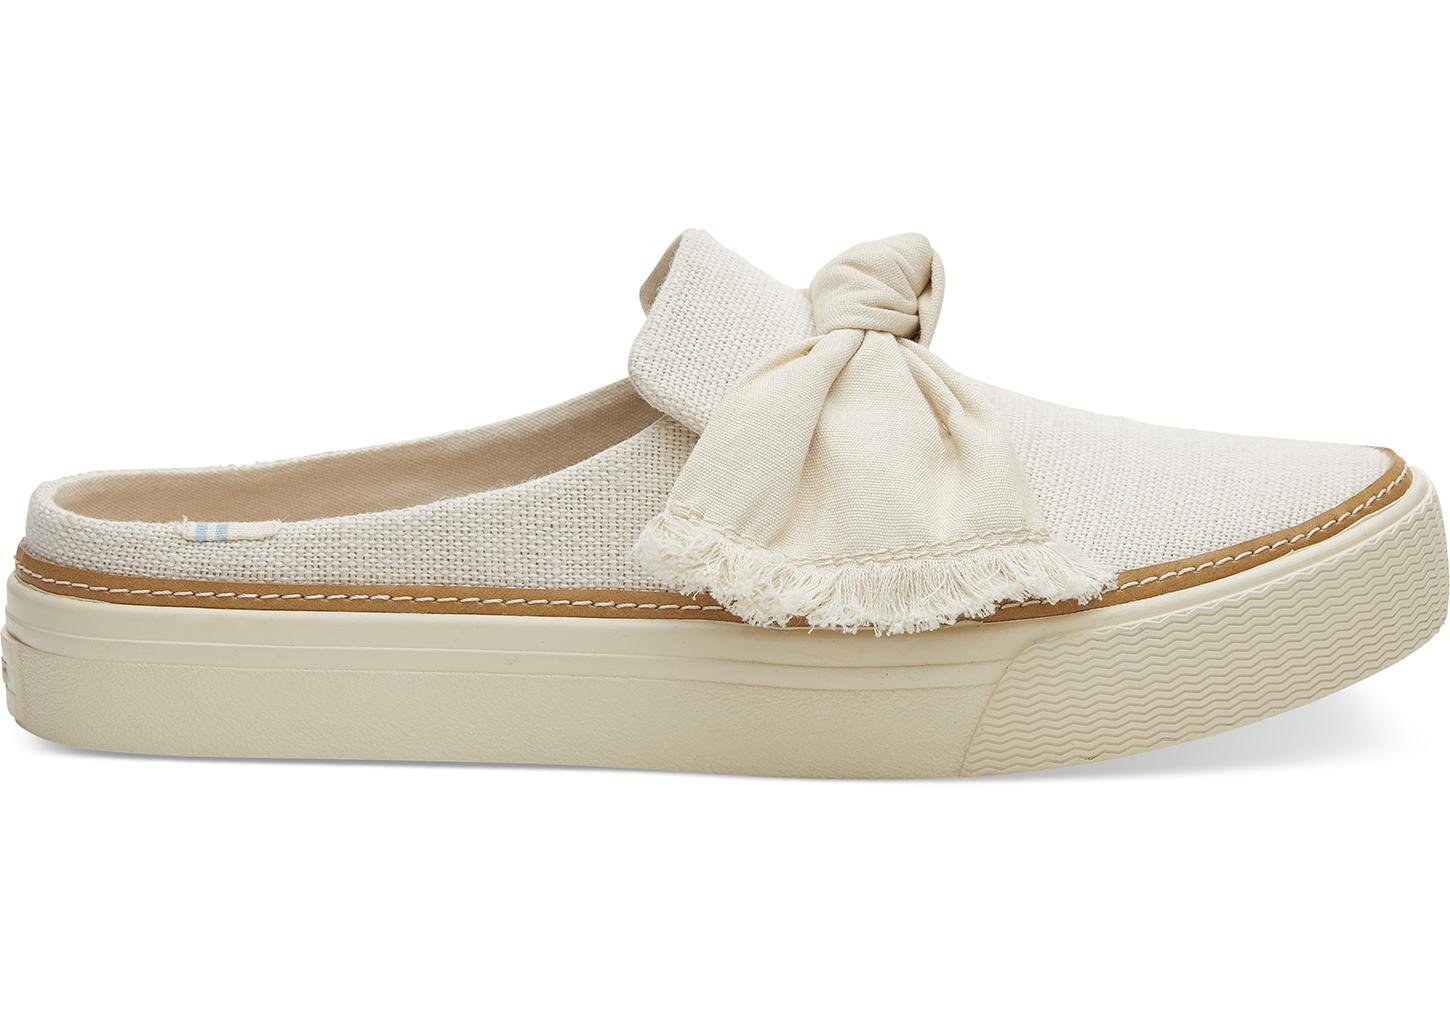 toms natural heritage canvas